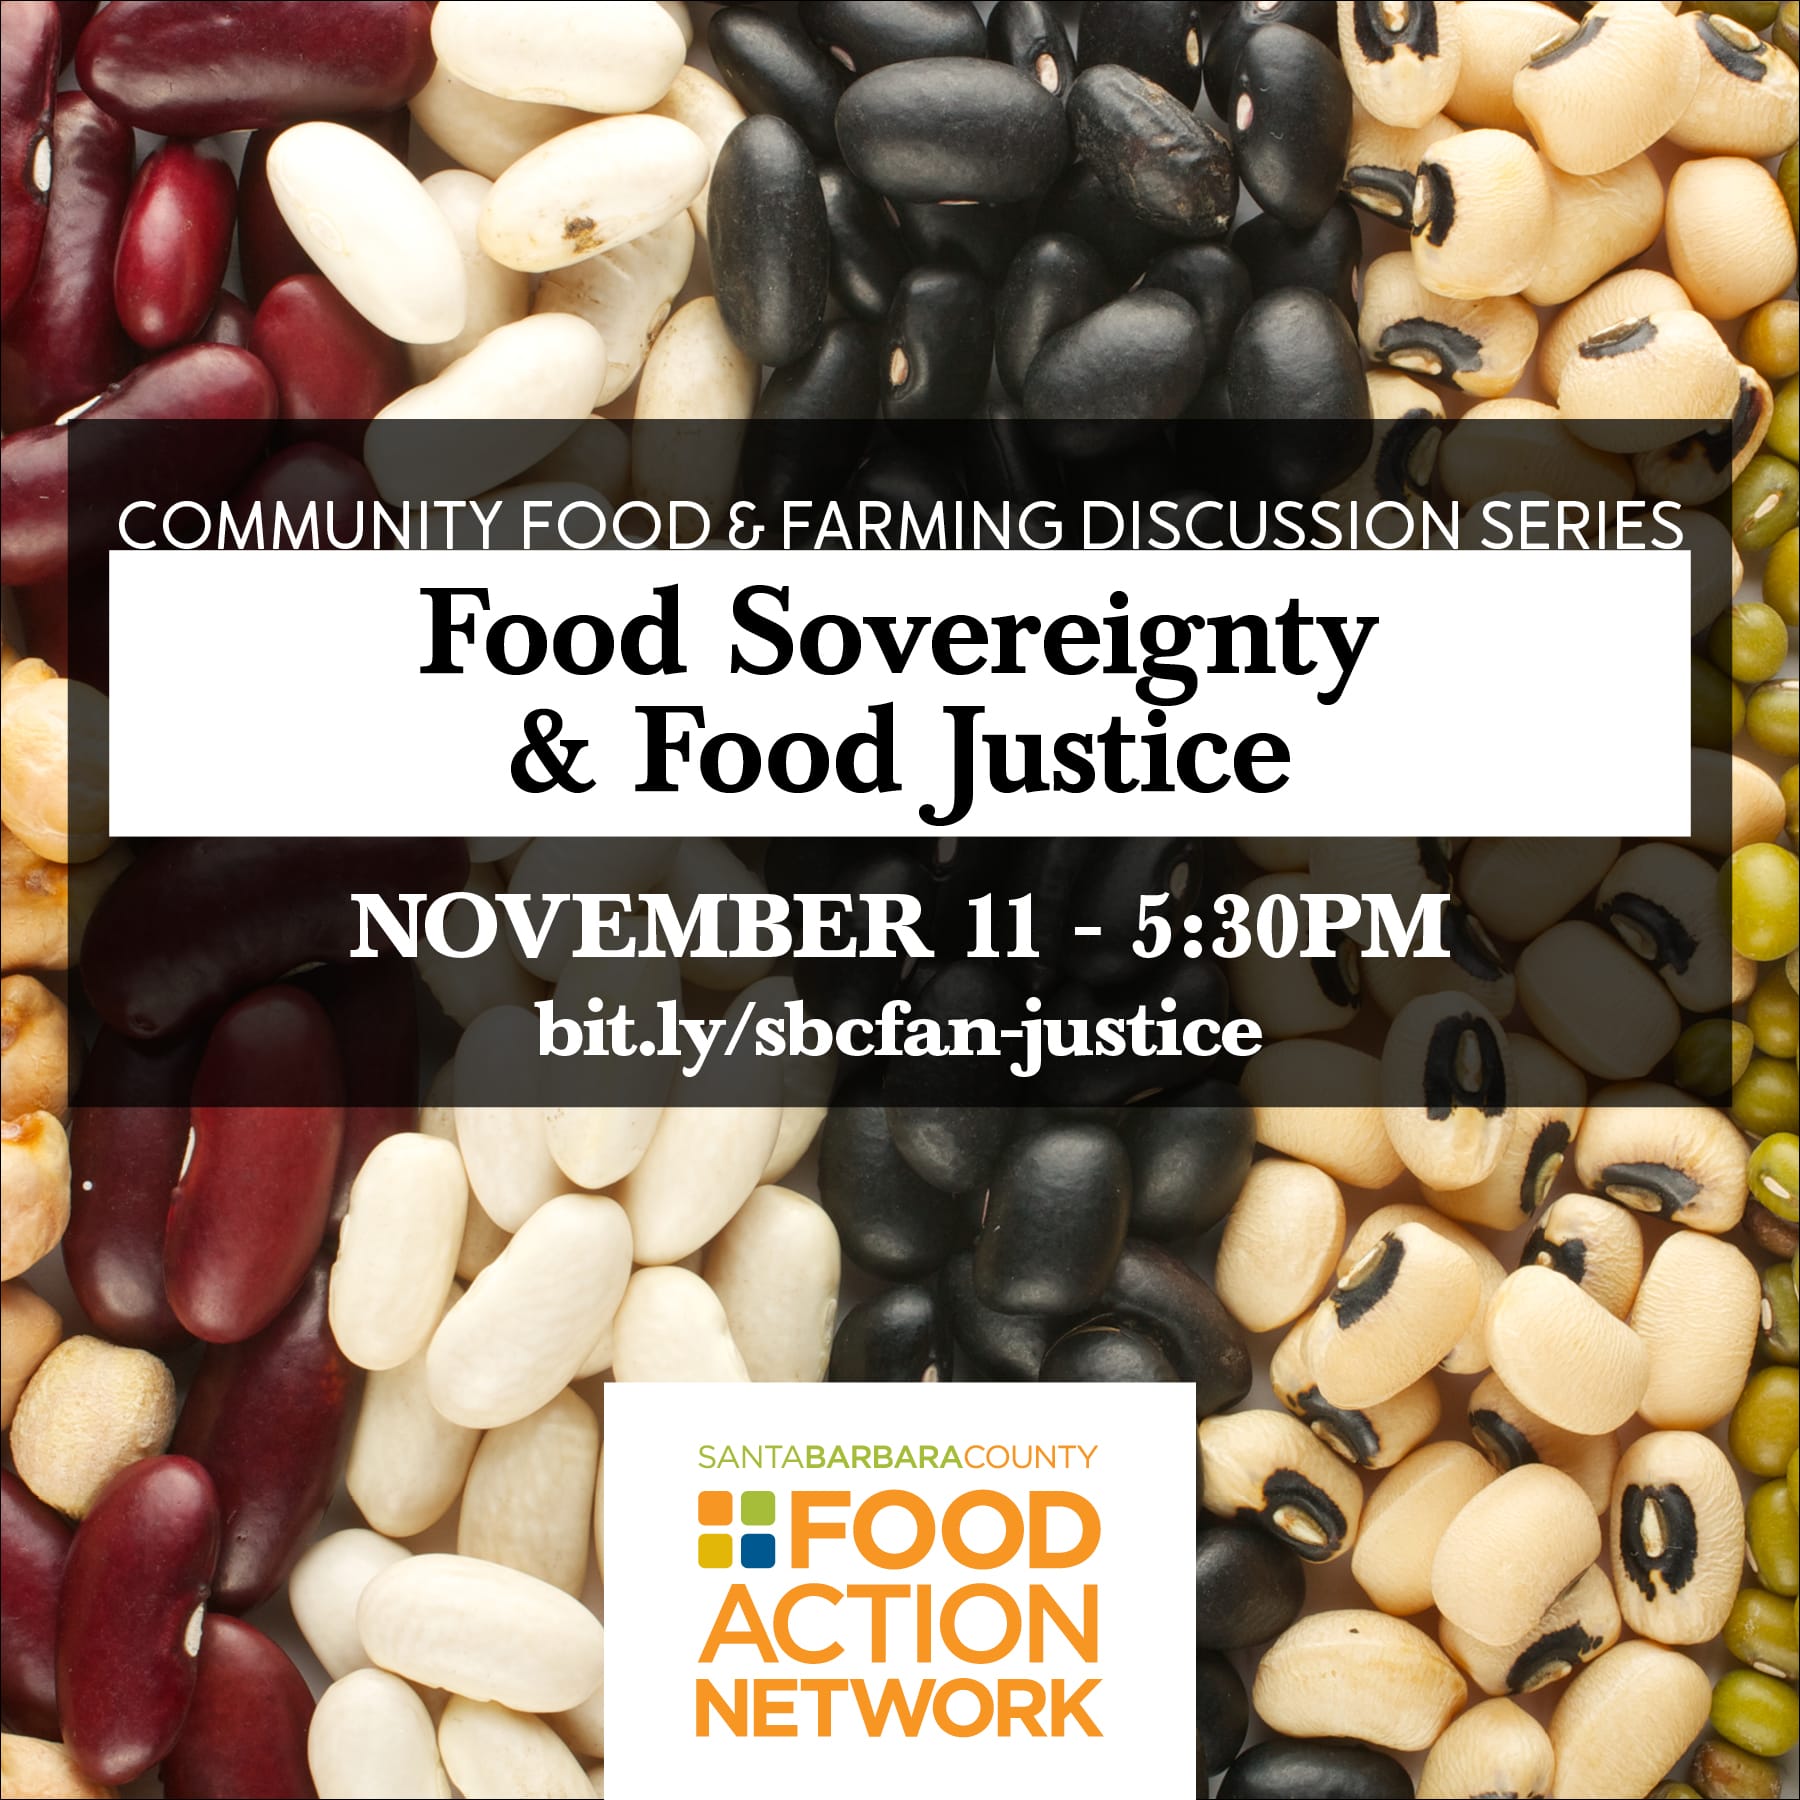 Community Food & Farming Discussion Series: Food Sovereignty & Food Justice